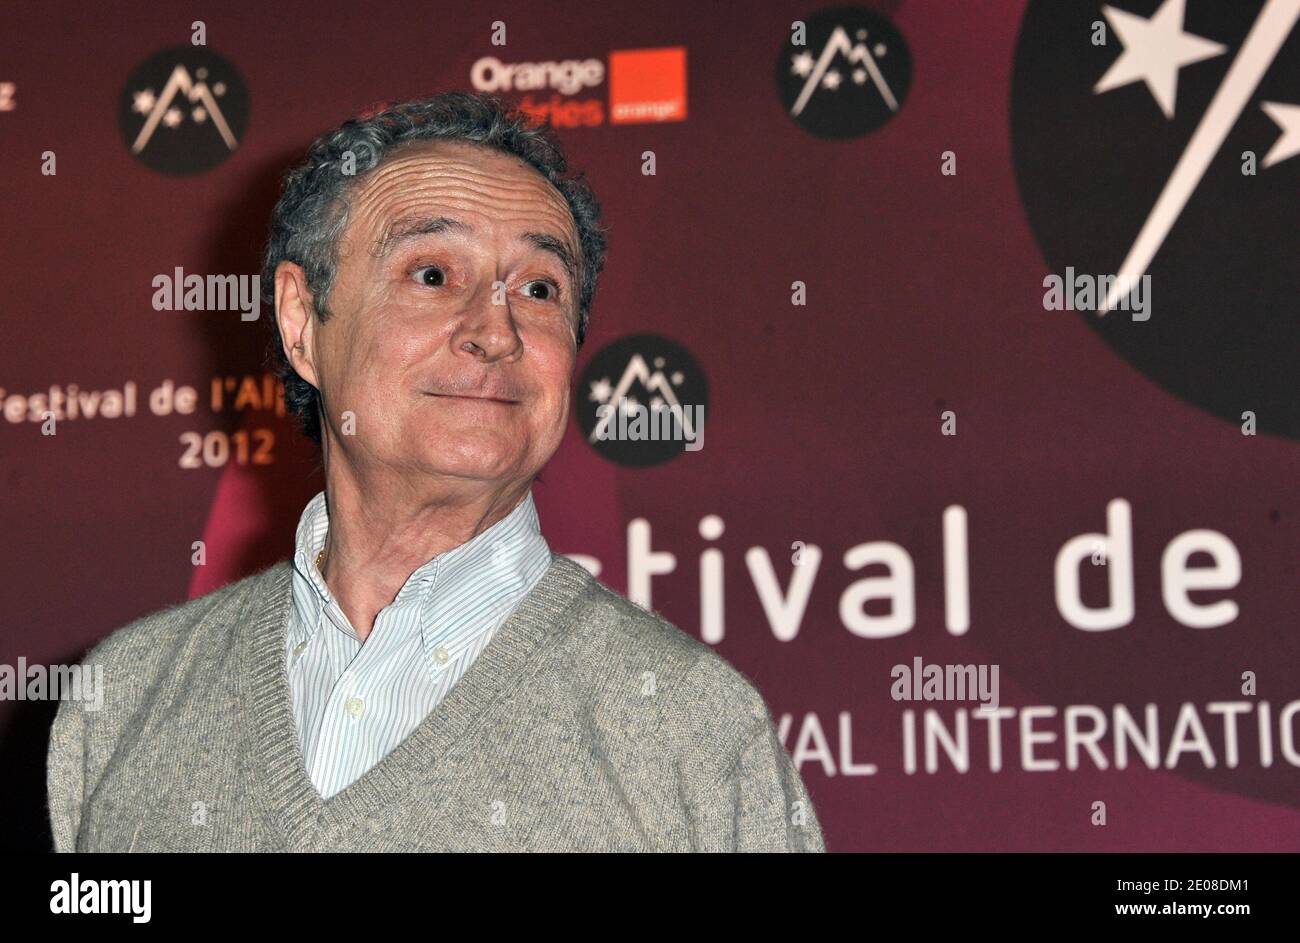 Daniel Prevost posing during the 15th Alpe d'Huez Comedy Film Festival held at l'Alpe d'Huez, France, on January 20, 2012. Photo by Charriau-Marechal/ABACAPRESS.COM Stock Photo